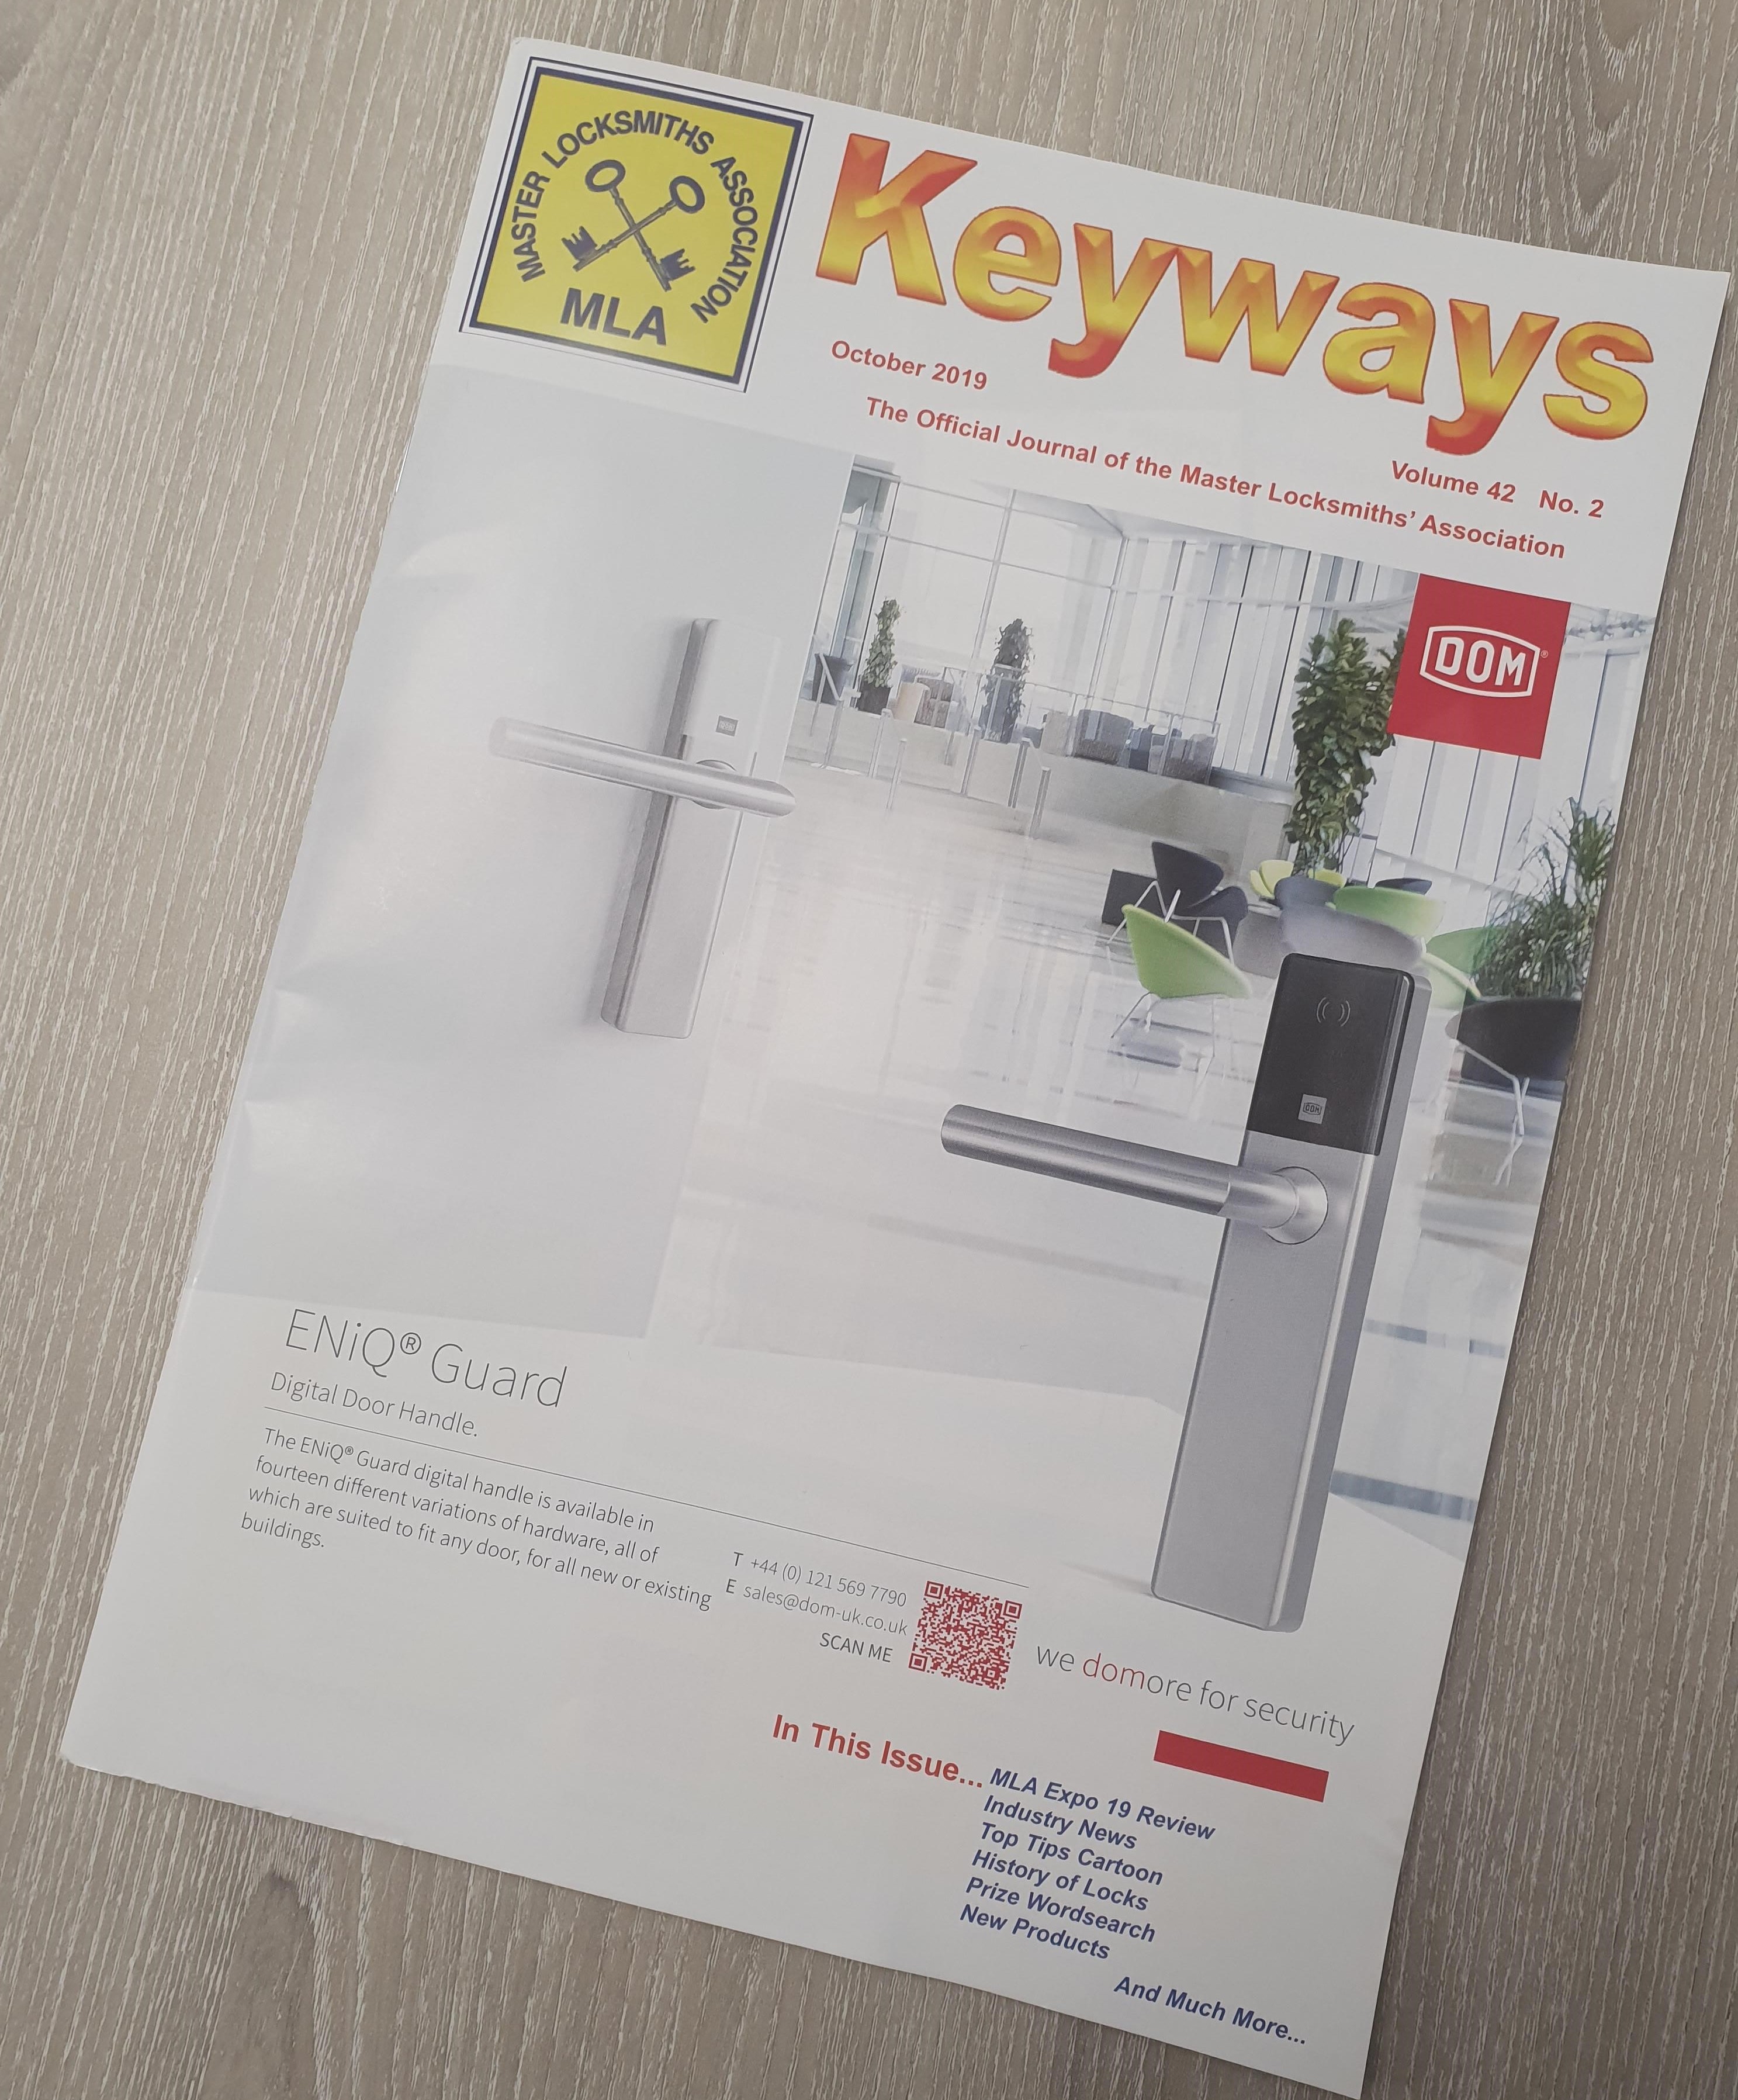 ENiQ Guard in the Keyways October 2019 edition